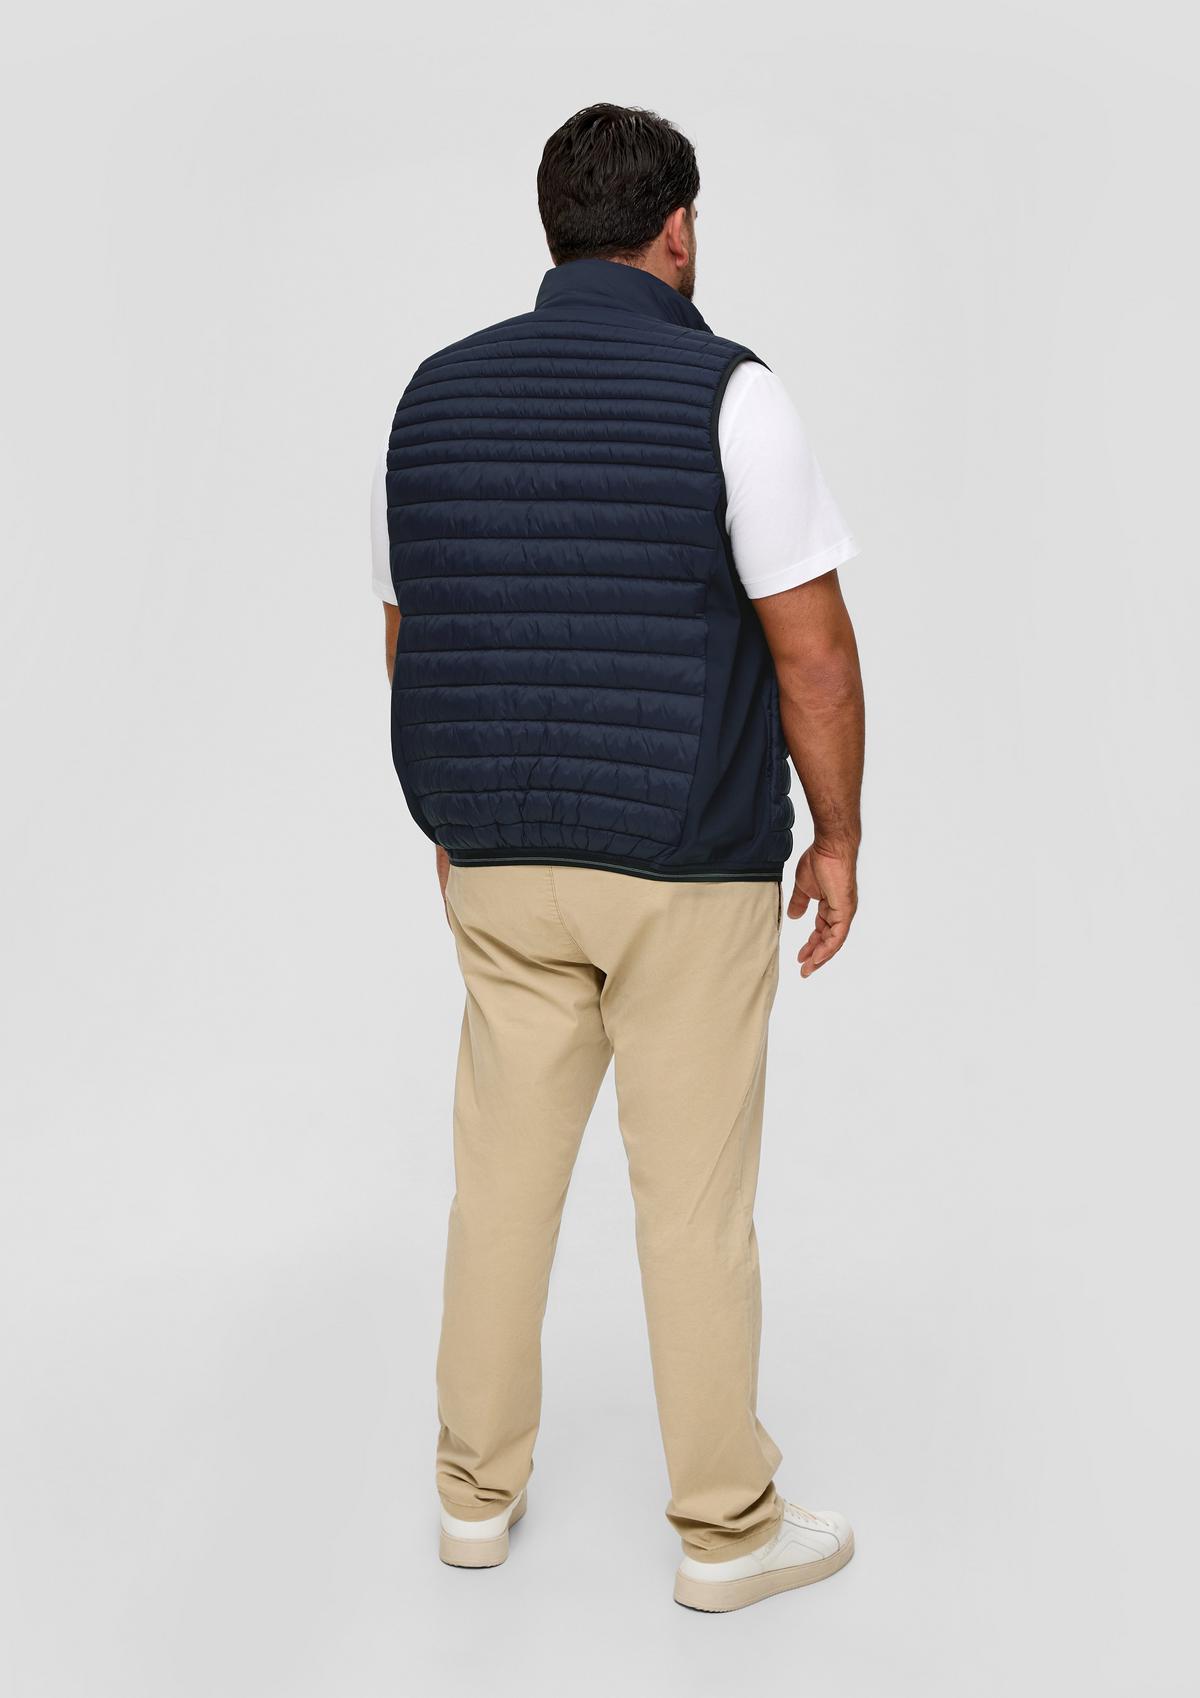 s.Oliver Softshell body warmer in a mix of materials